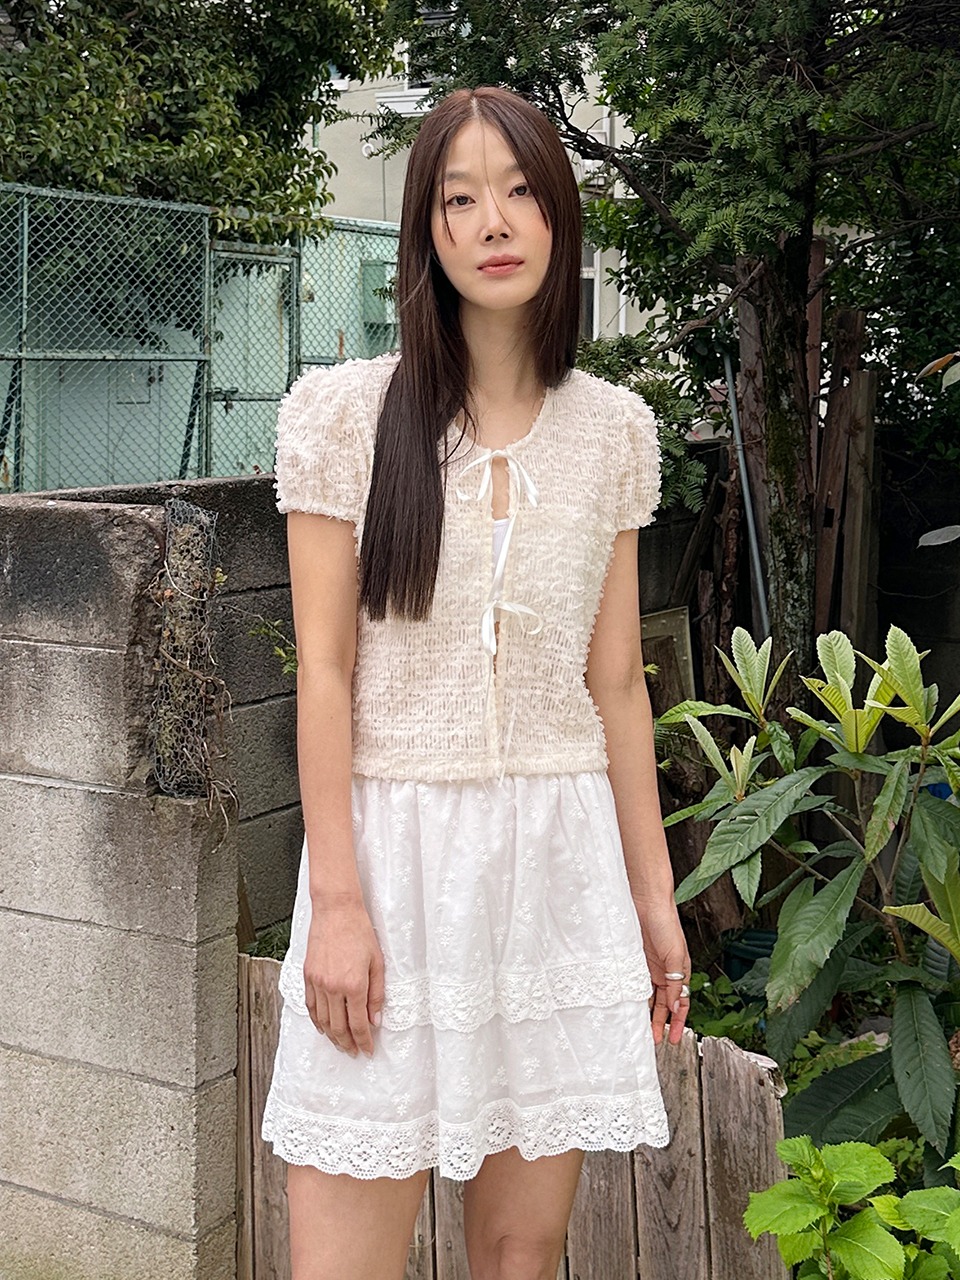 LACE TRIMMING SKIRT (WHITE)